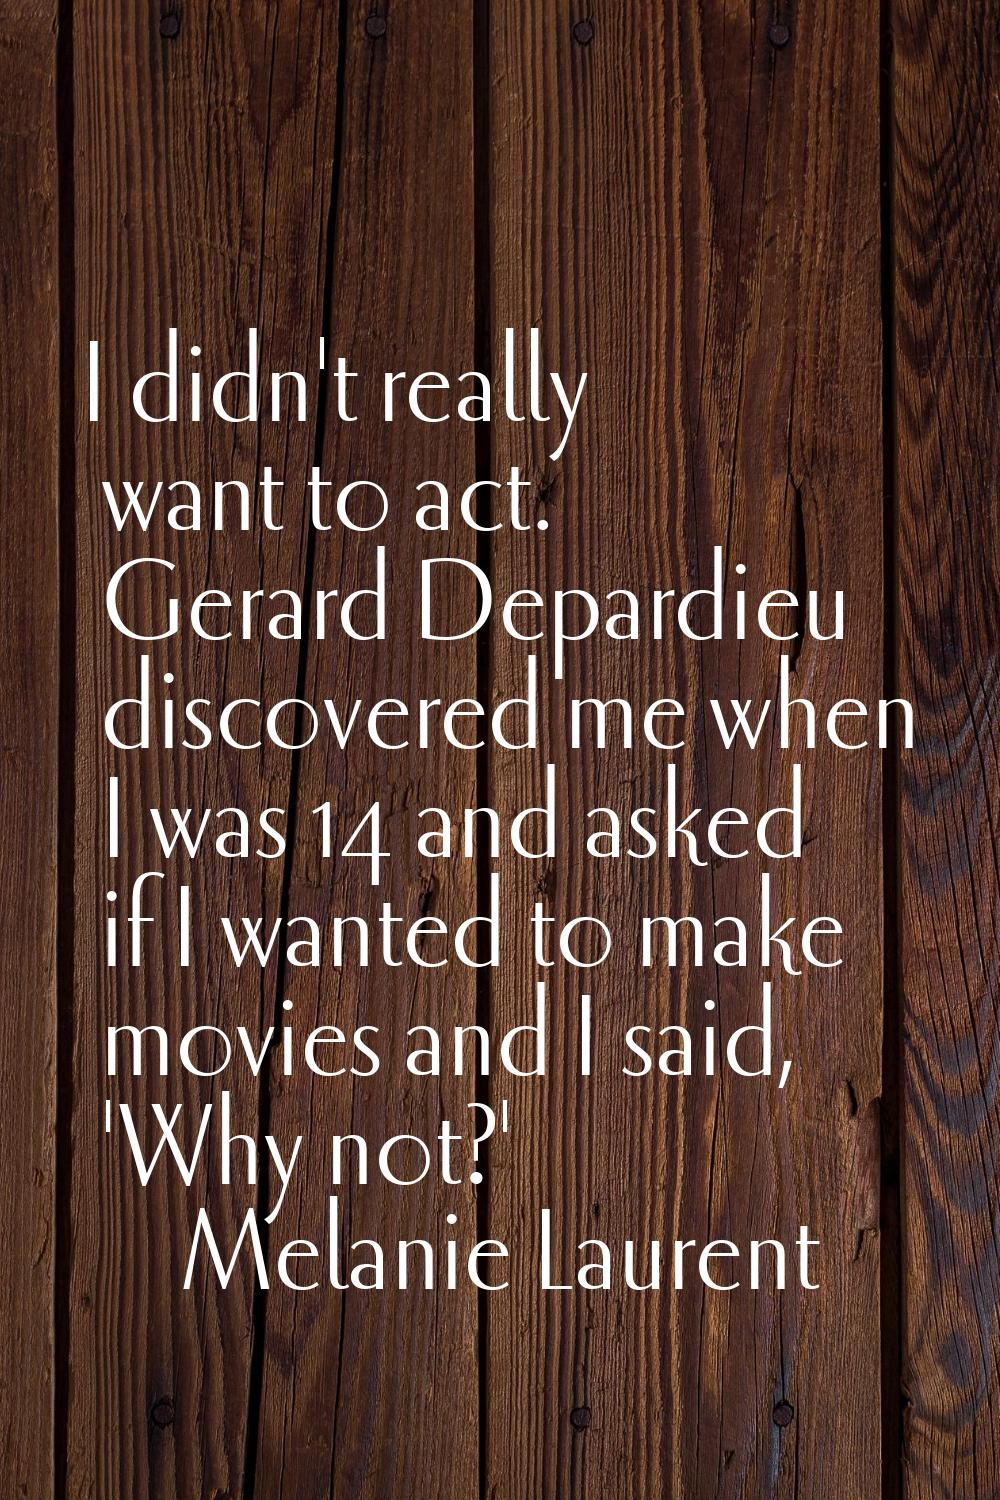 I didn't really want to act. Gerard Depardieu discovered me when I was 14 and asked if I wanted to 